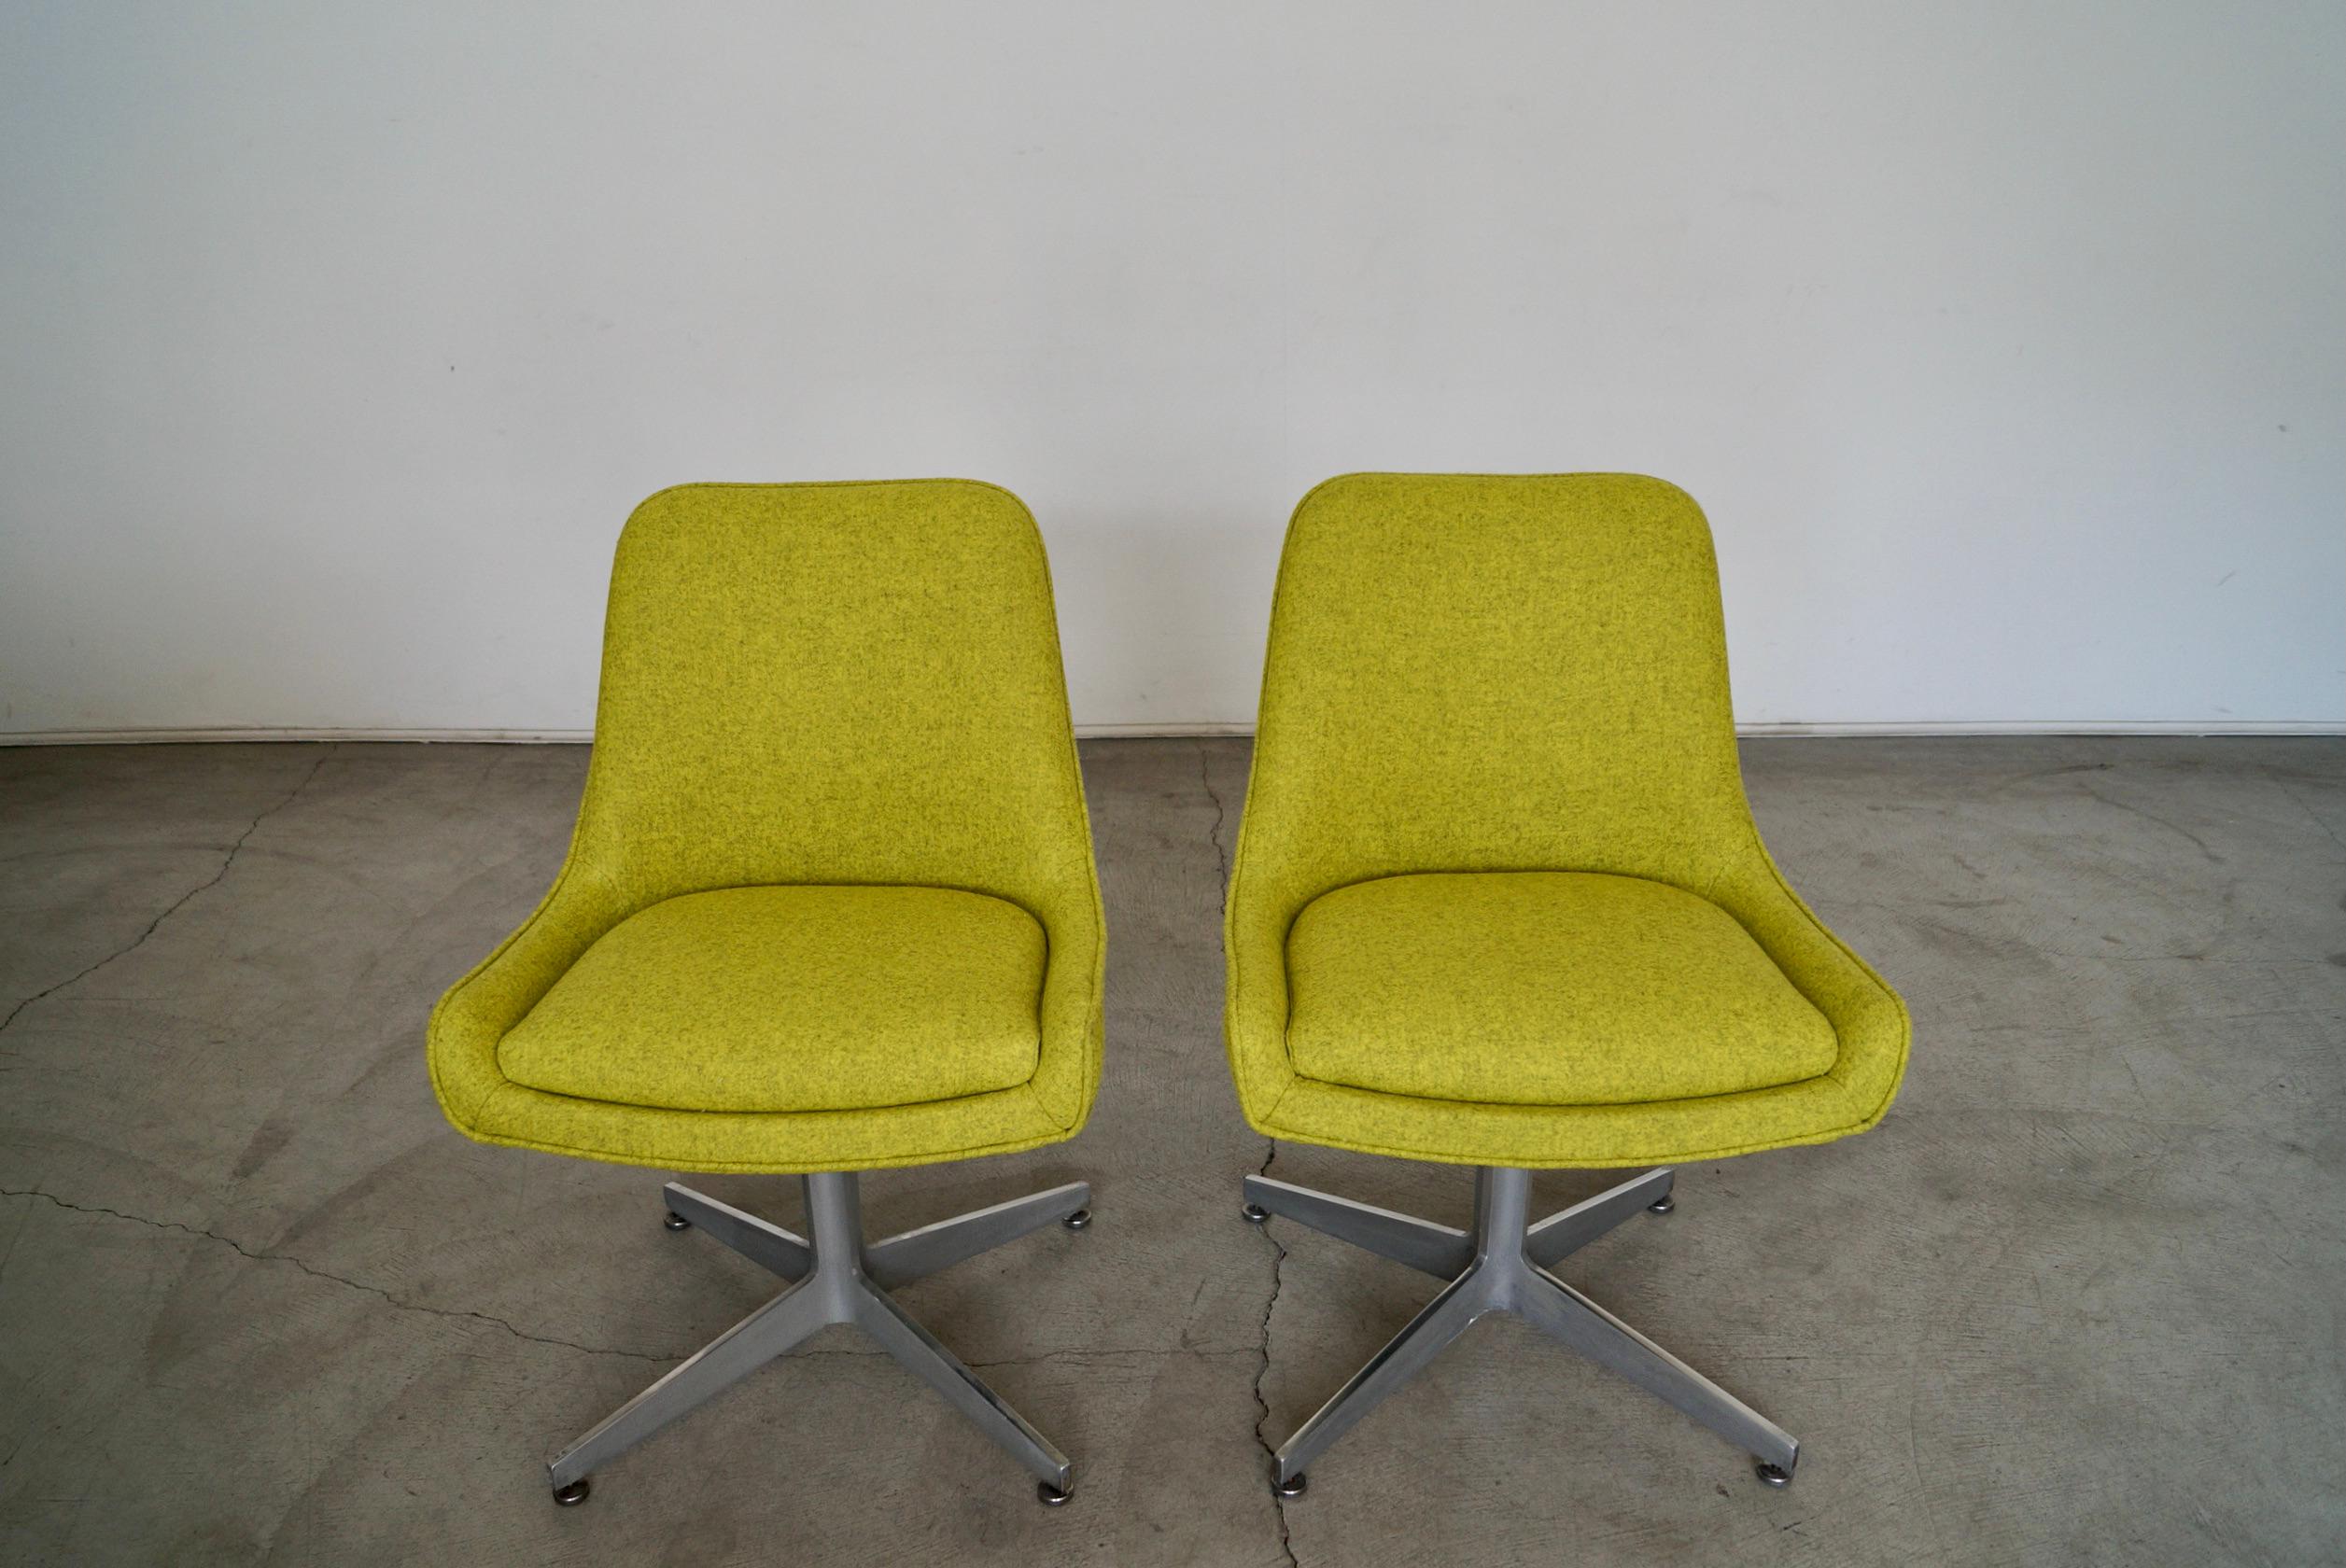 Vintage Mid-Century Modern lounge chairs for sale. They are from the 1960's, and have been professionally reupholstered in Camira's designer fabric in Blazer that goes for $54 a yard. The fabric is an electric green with black undertones, and is